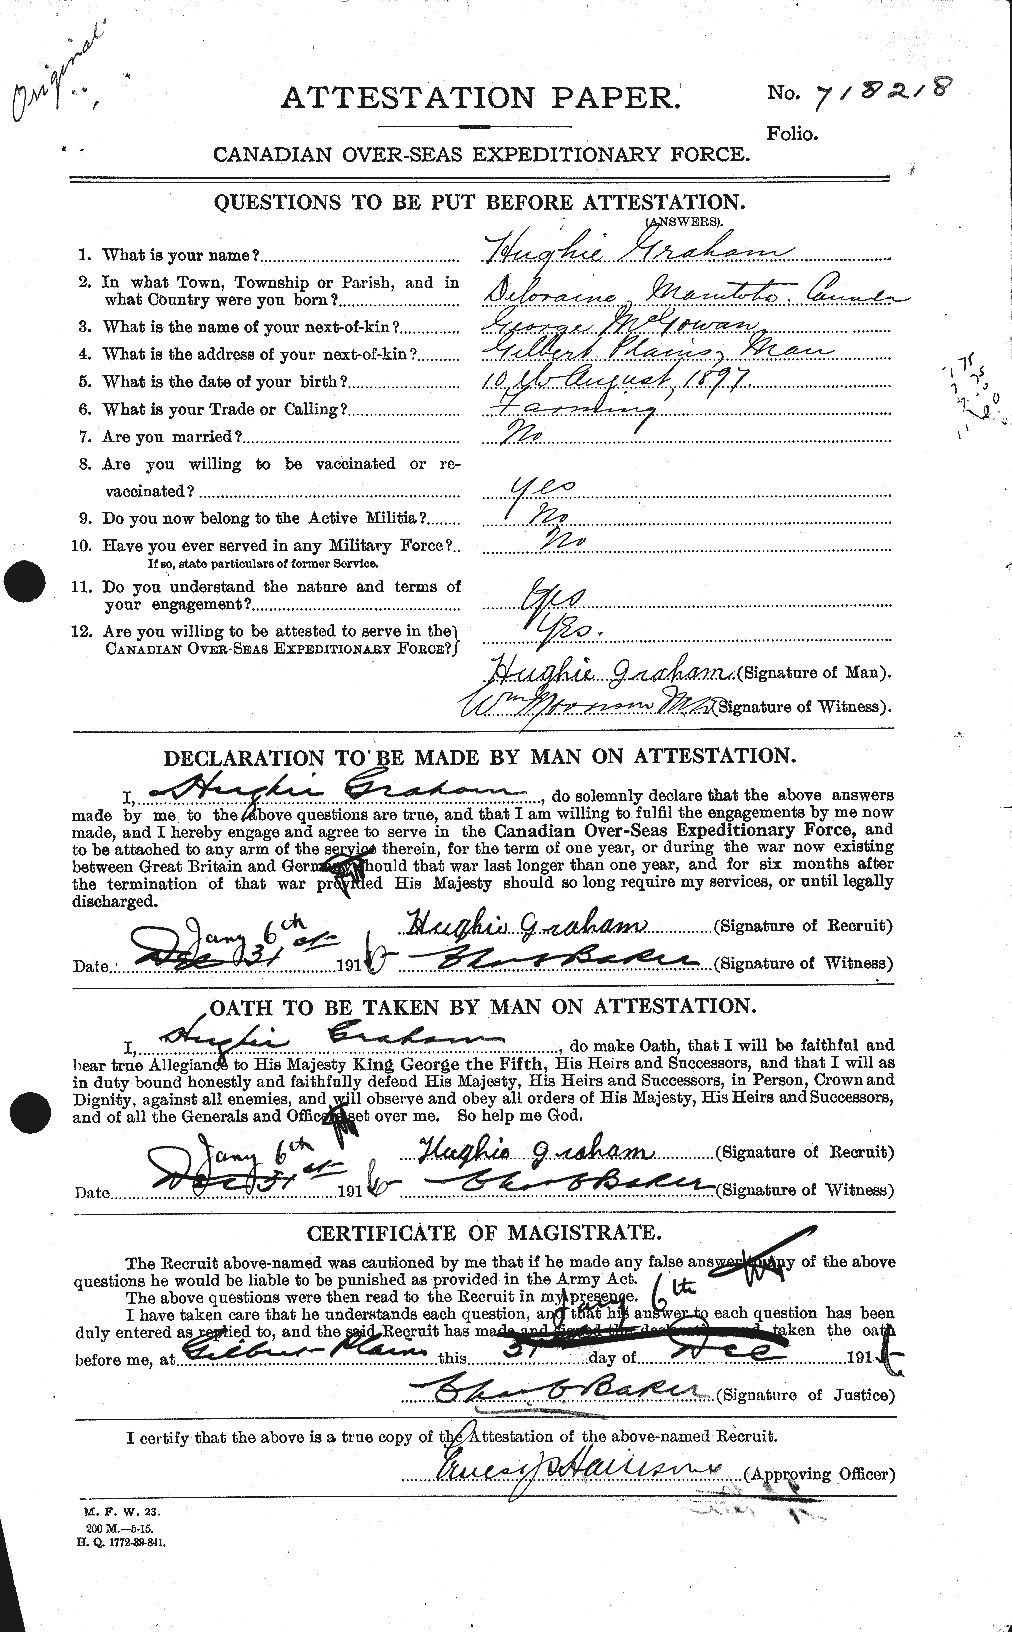 Personnel Records of the First World War - CEF 357766a